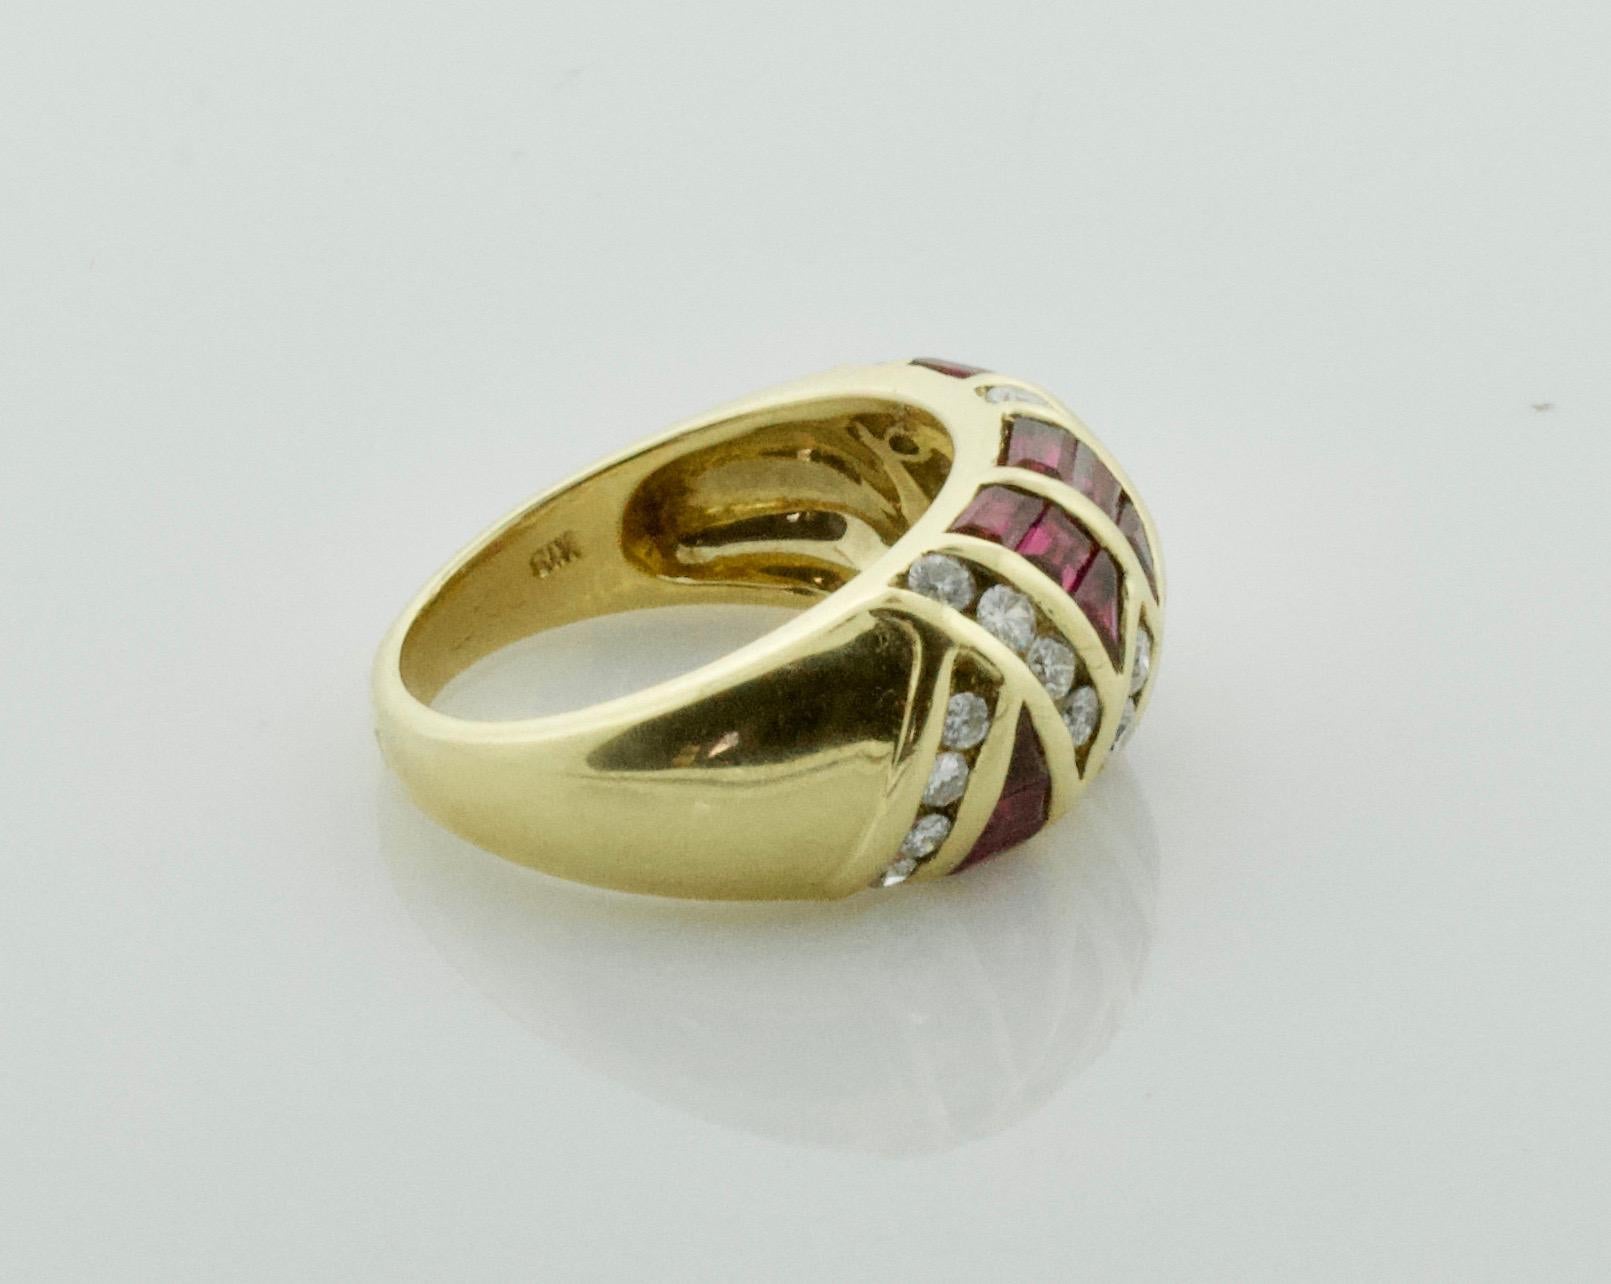 Fancy Cut Ruby and Diamond Wedding Band in 18 Karat In New Condition For Sale In Wailea, HI